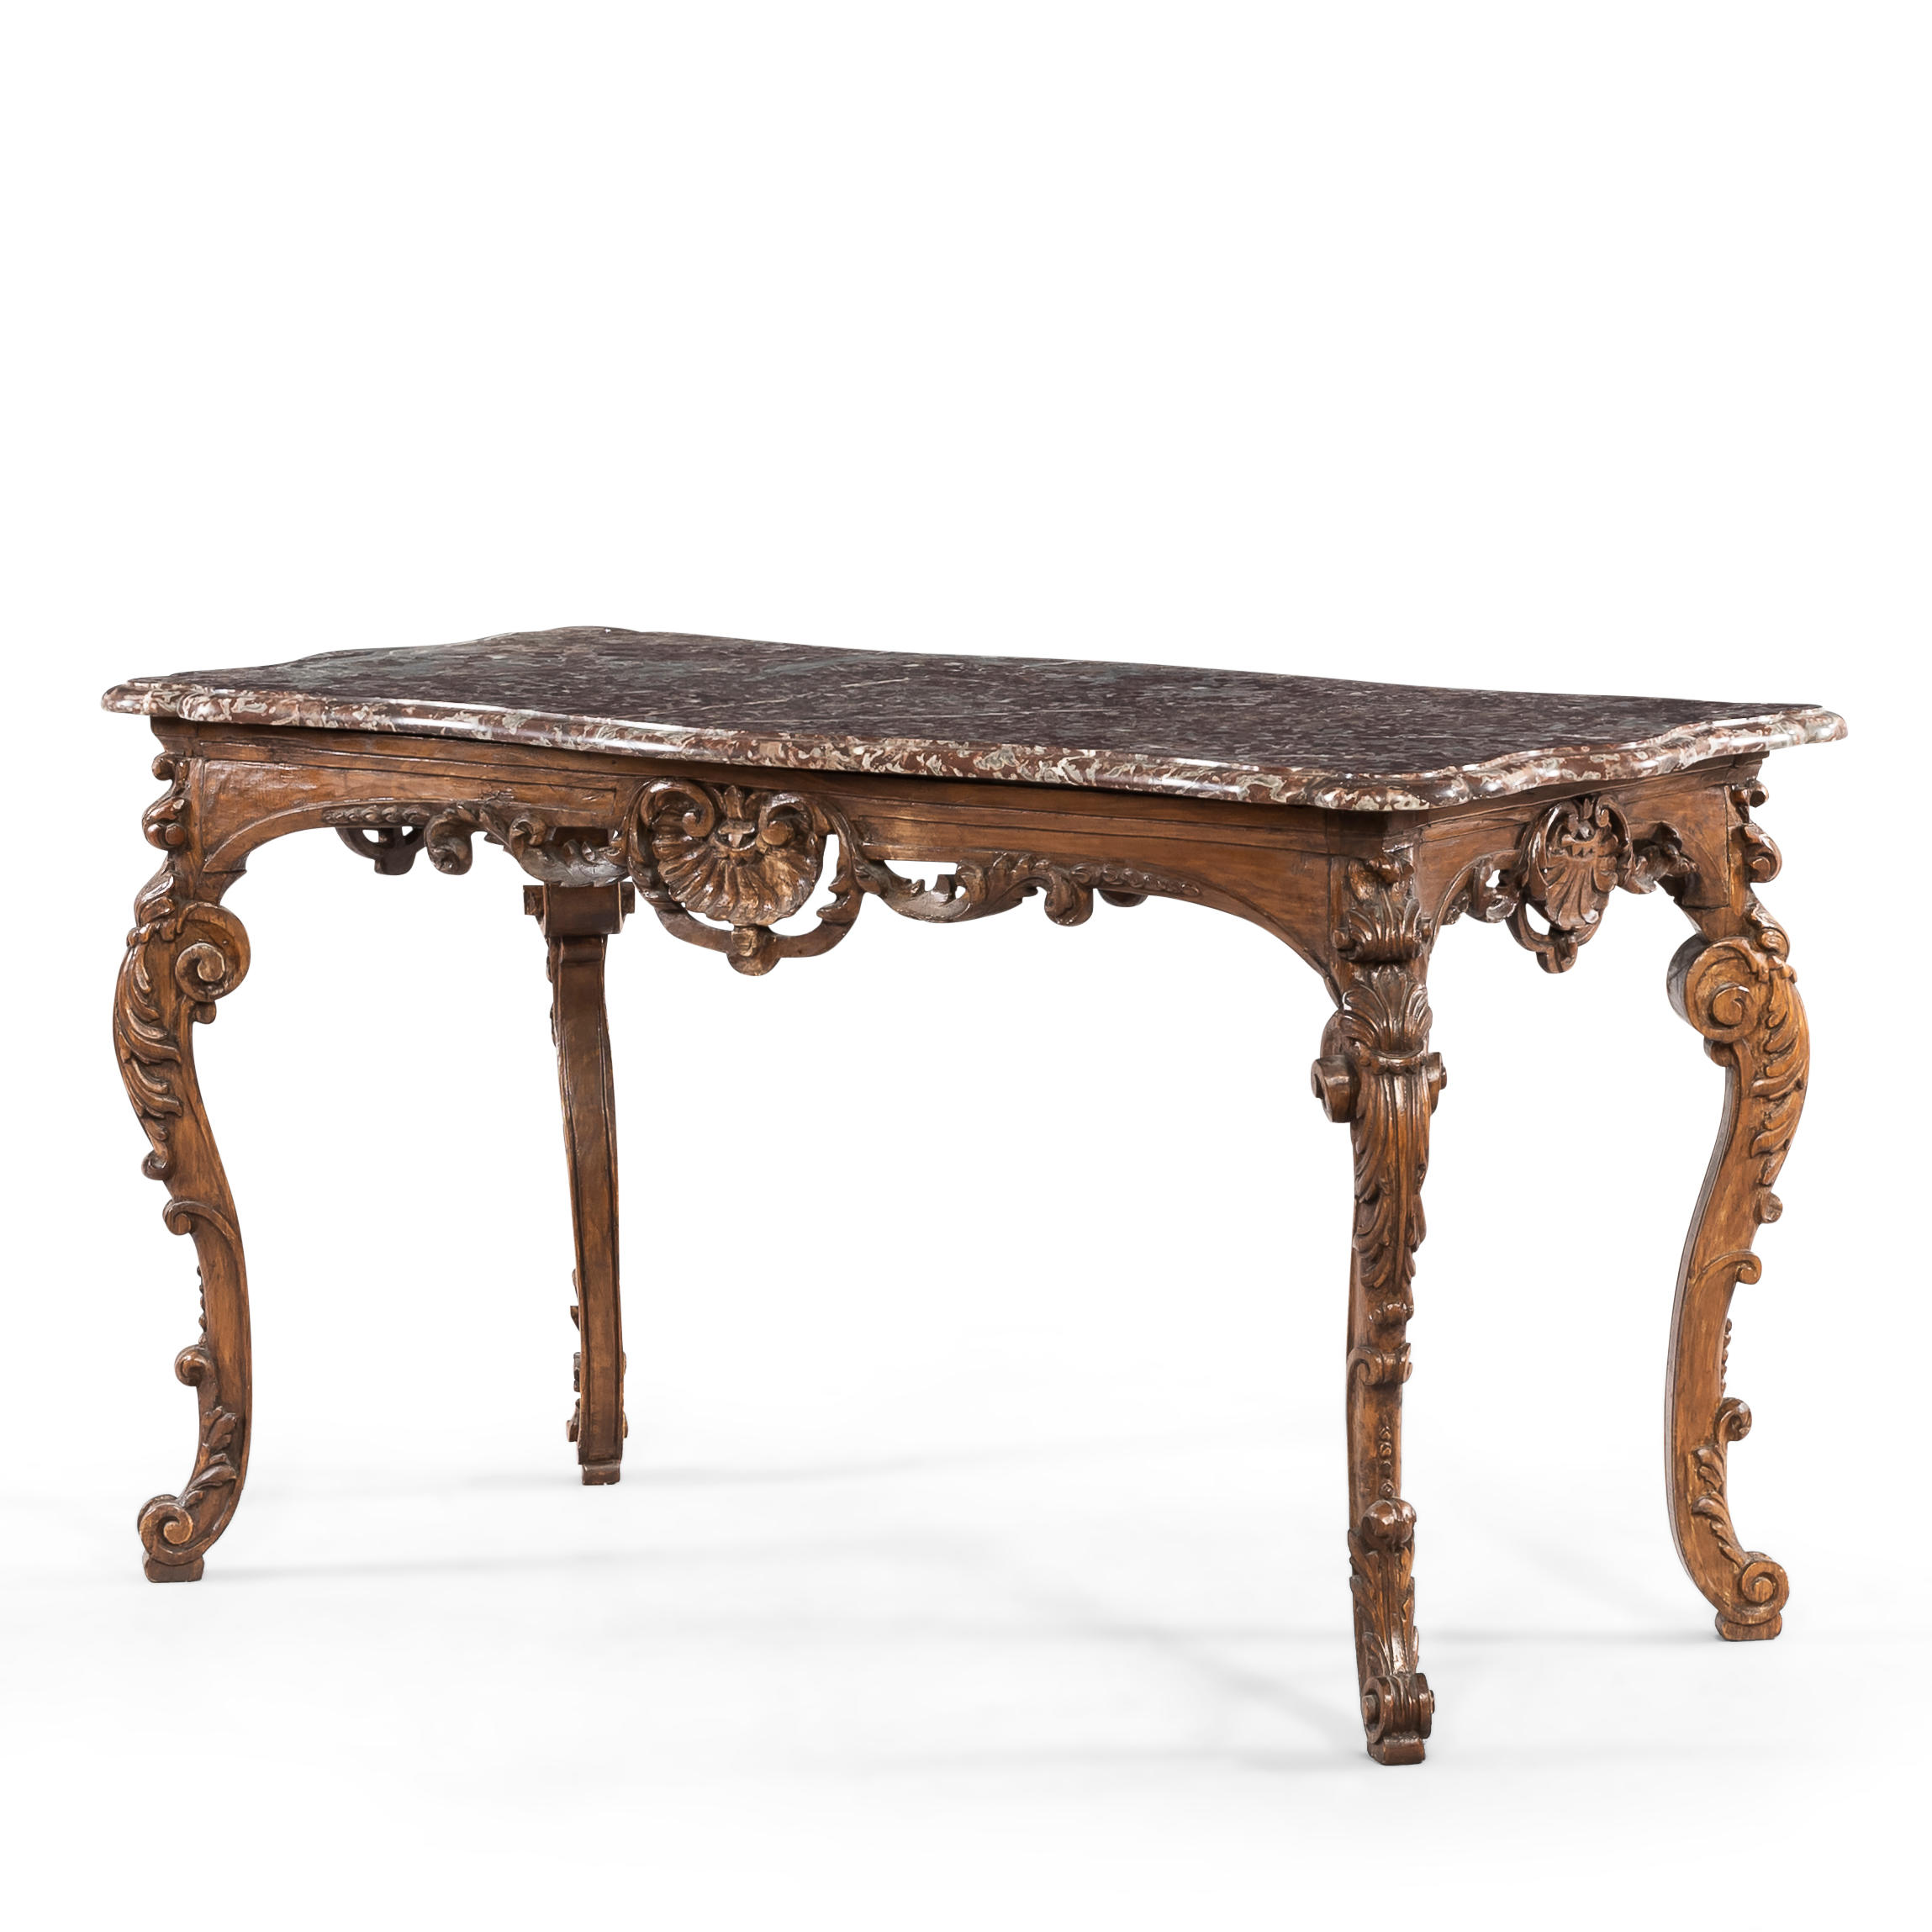 LOUIS XV STYLE CARVED OAK MARBLE